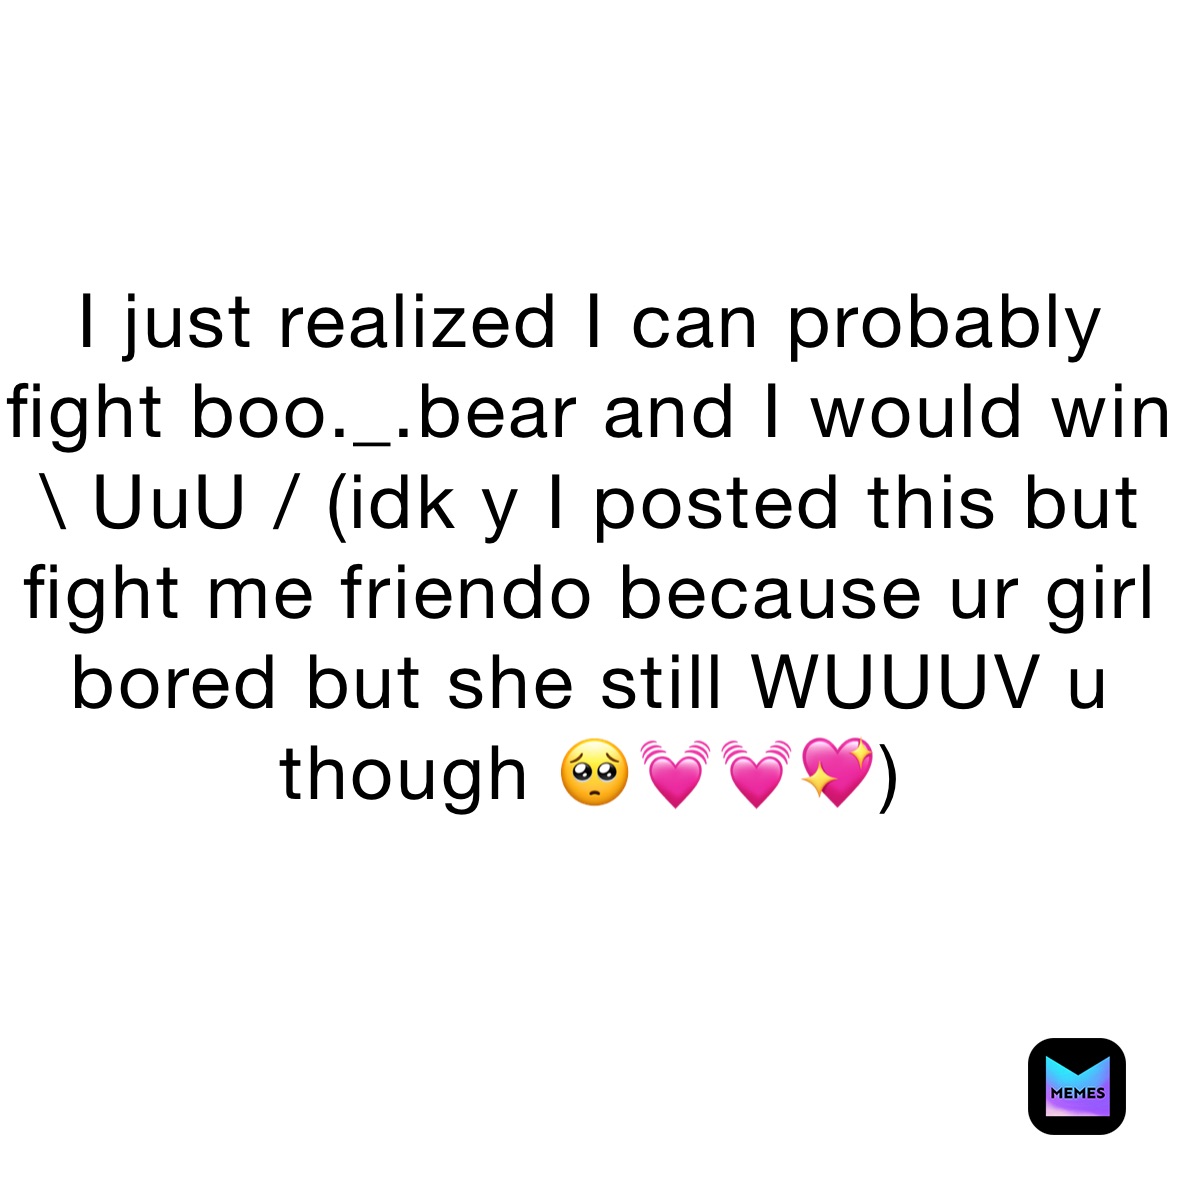 I just realized I can probably fight boo._.bear and I would win \ UuU / (idk y I posted this but fight me friendo because ur girl bored but she still WUUUV u though 🥺💓💓💖)
